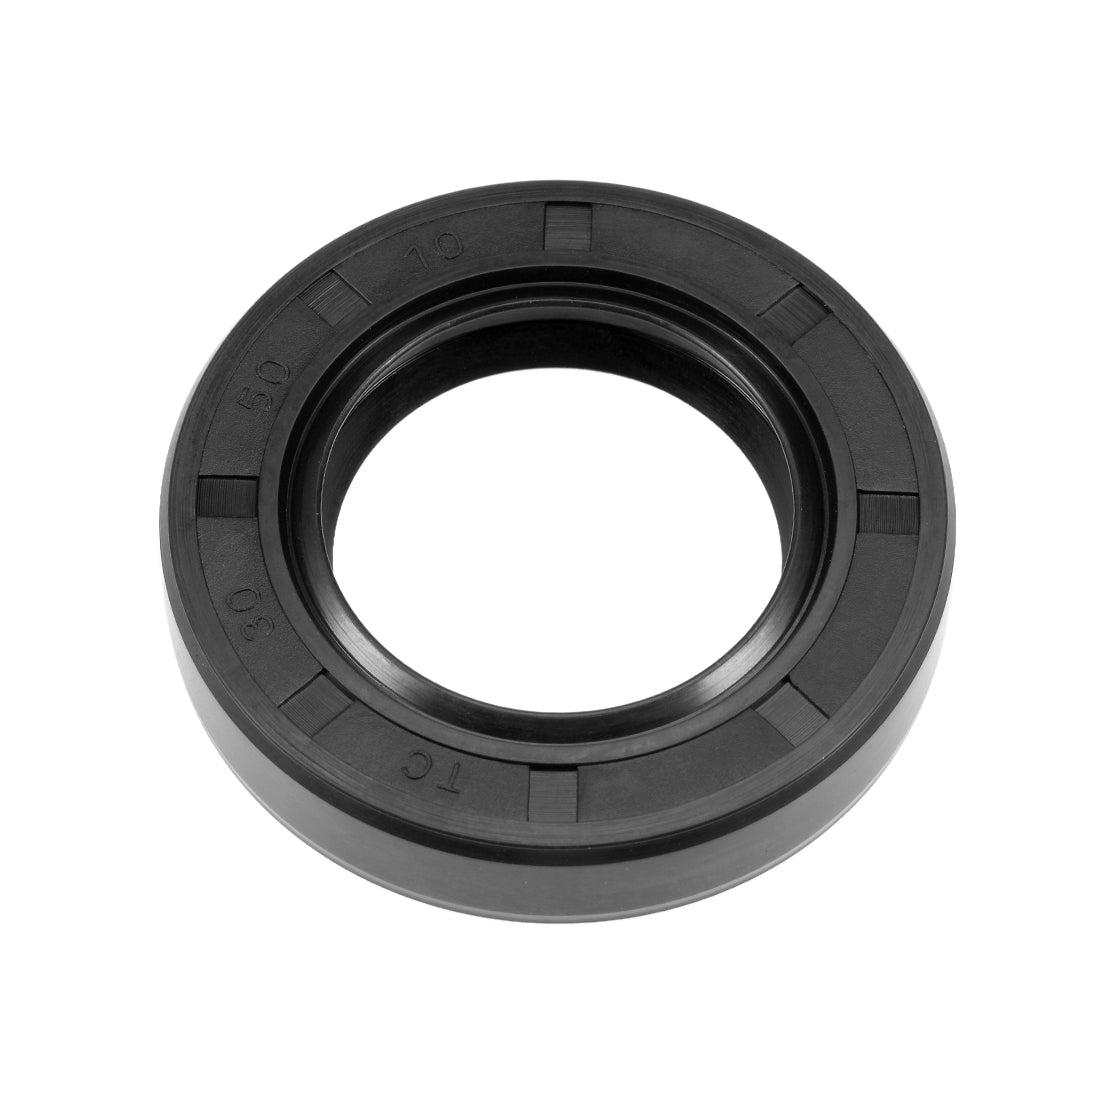 Uxcell Uxcell Oil Seal, TC 32mm x 50mm x 10mm, Nitrile Rubber Cover Double Lip